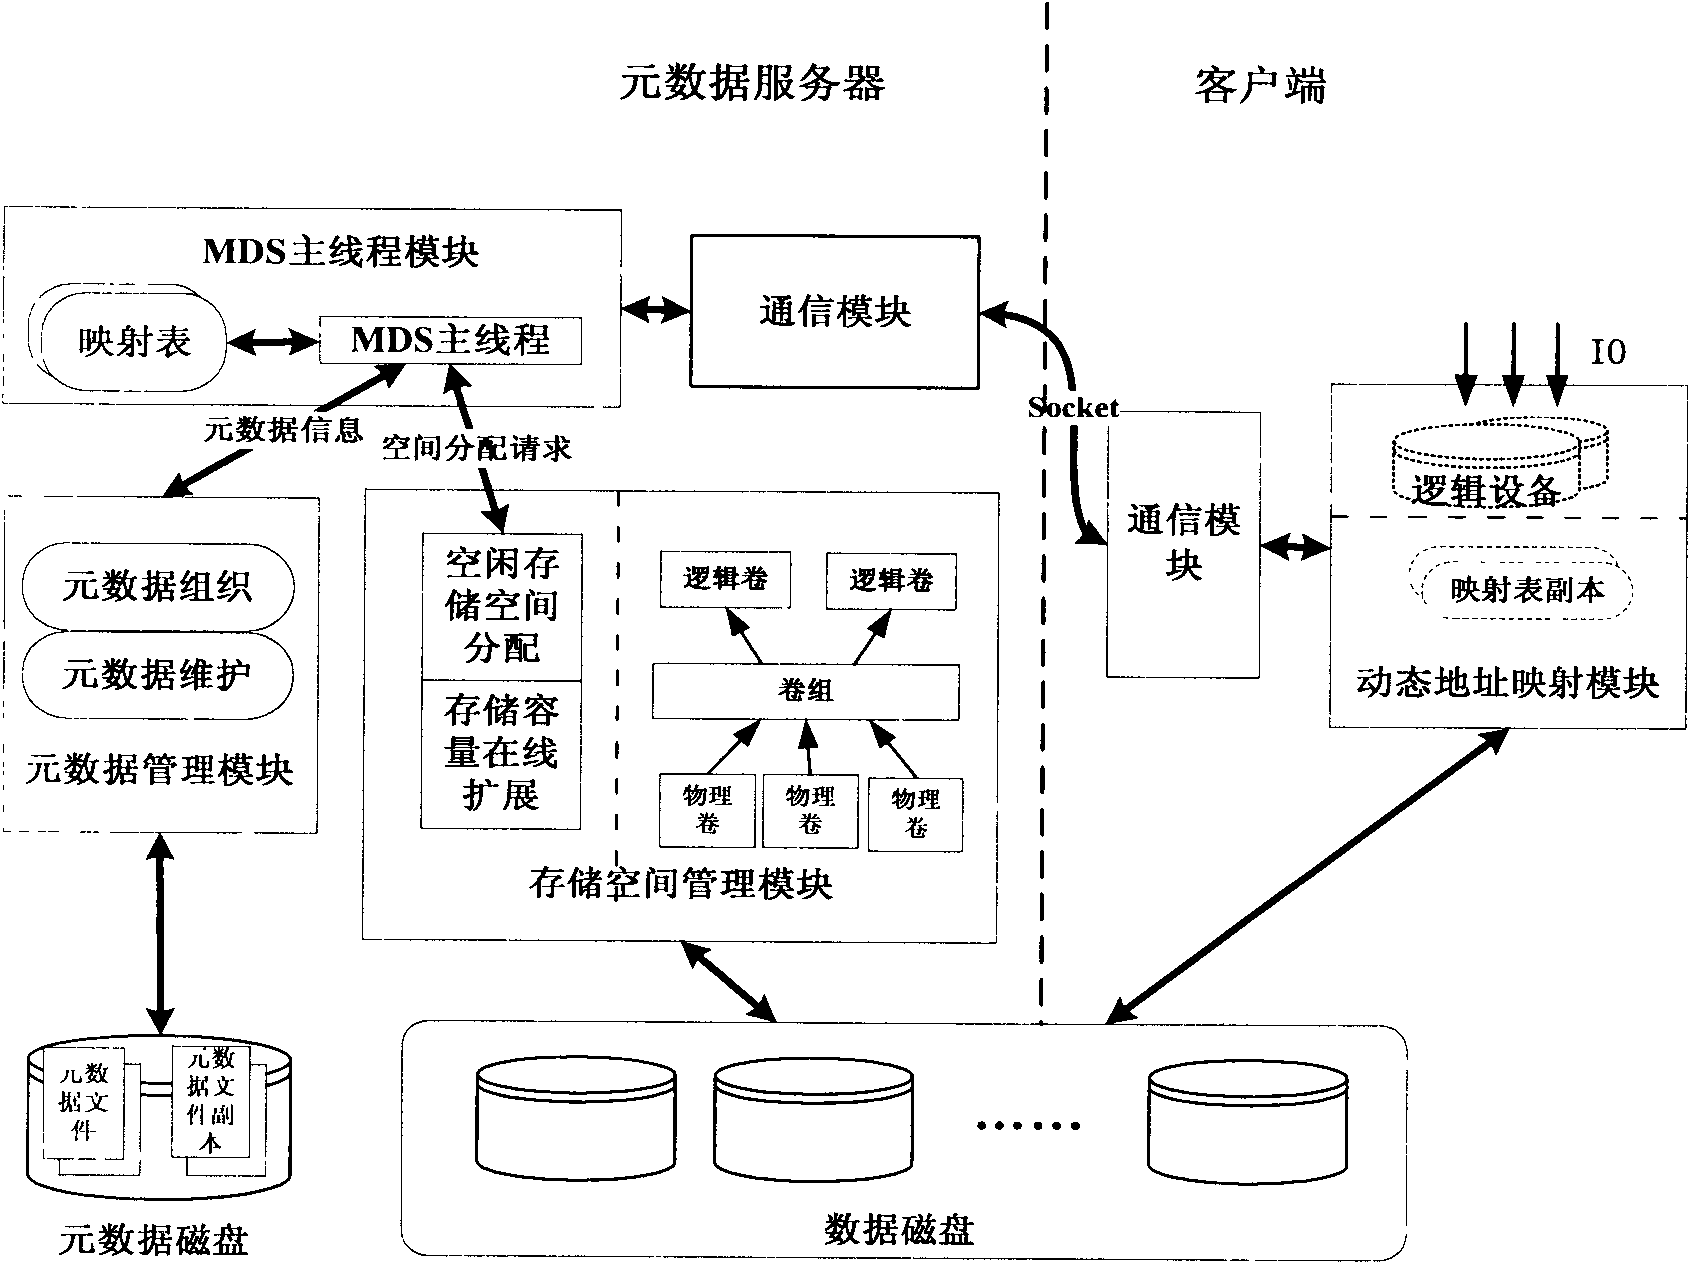 Method for allocating mass storage resources according to needs in heterogeneous SAN (Storage Area Network) environment